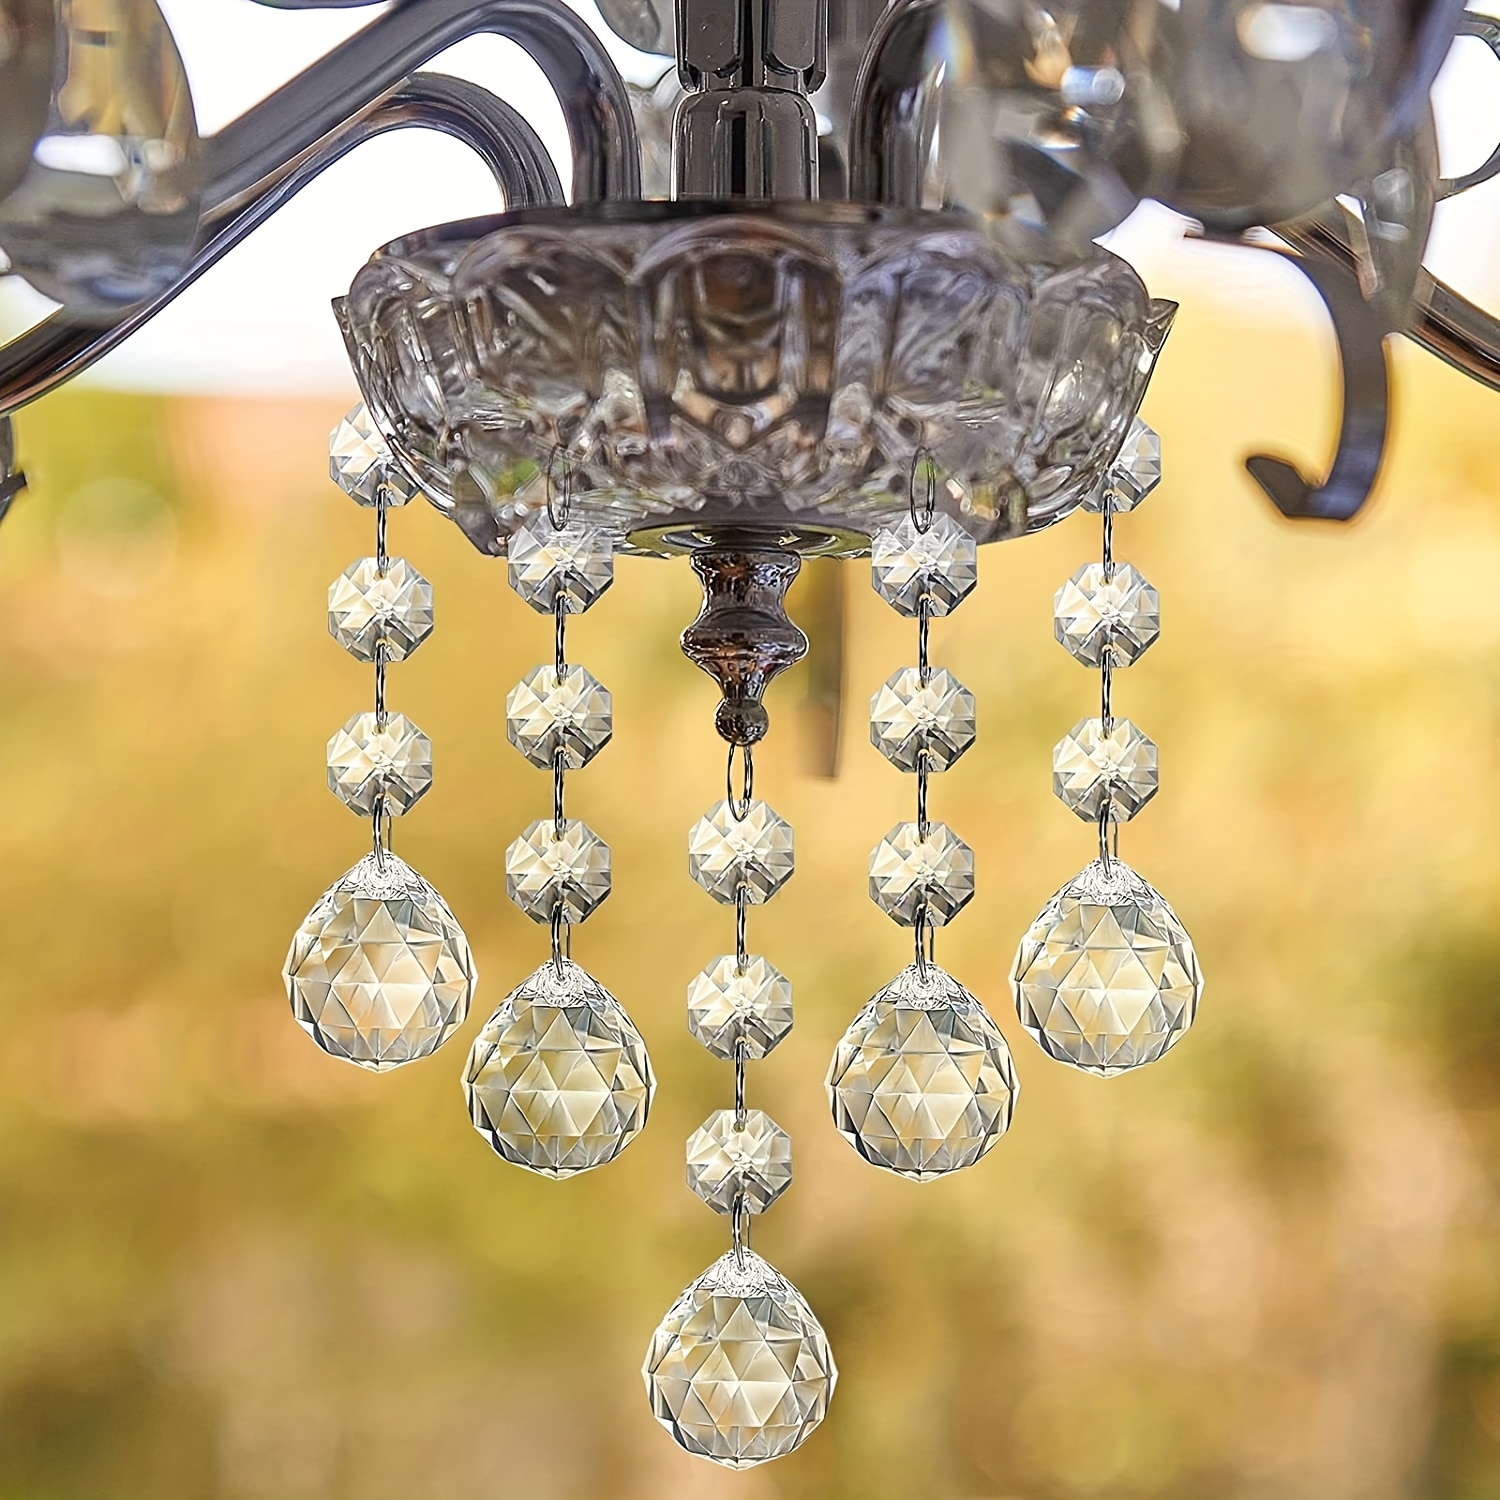 12 CLEAR CRYSTAL BEAD MAGNETIC CHANDELIER GARLAND (Set/3